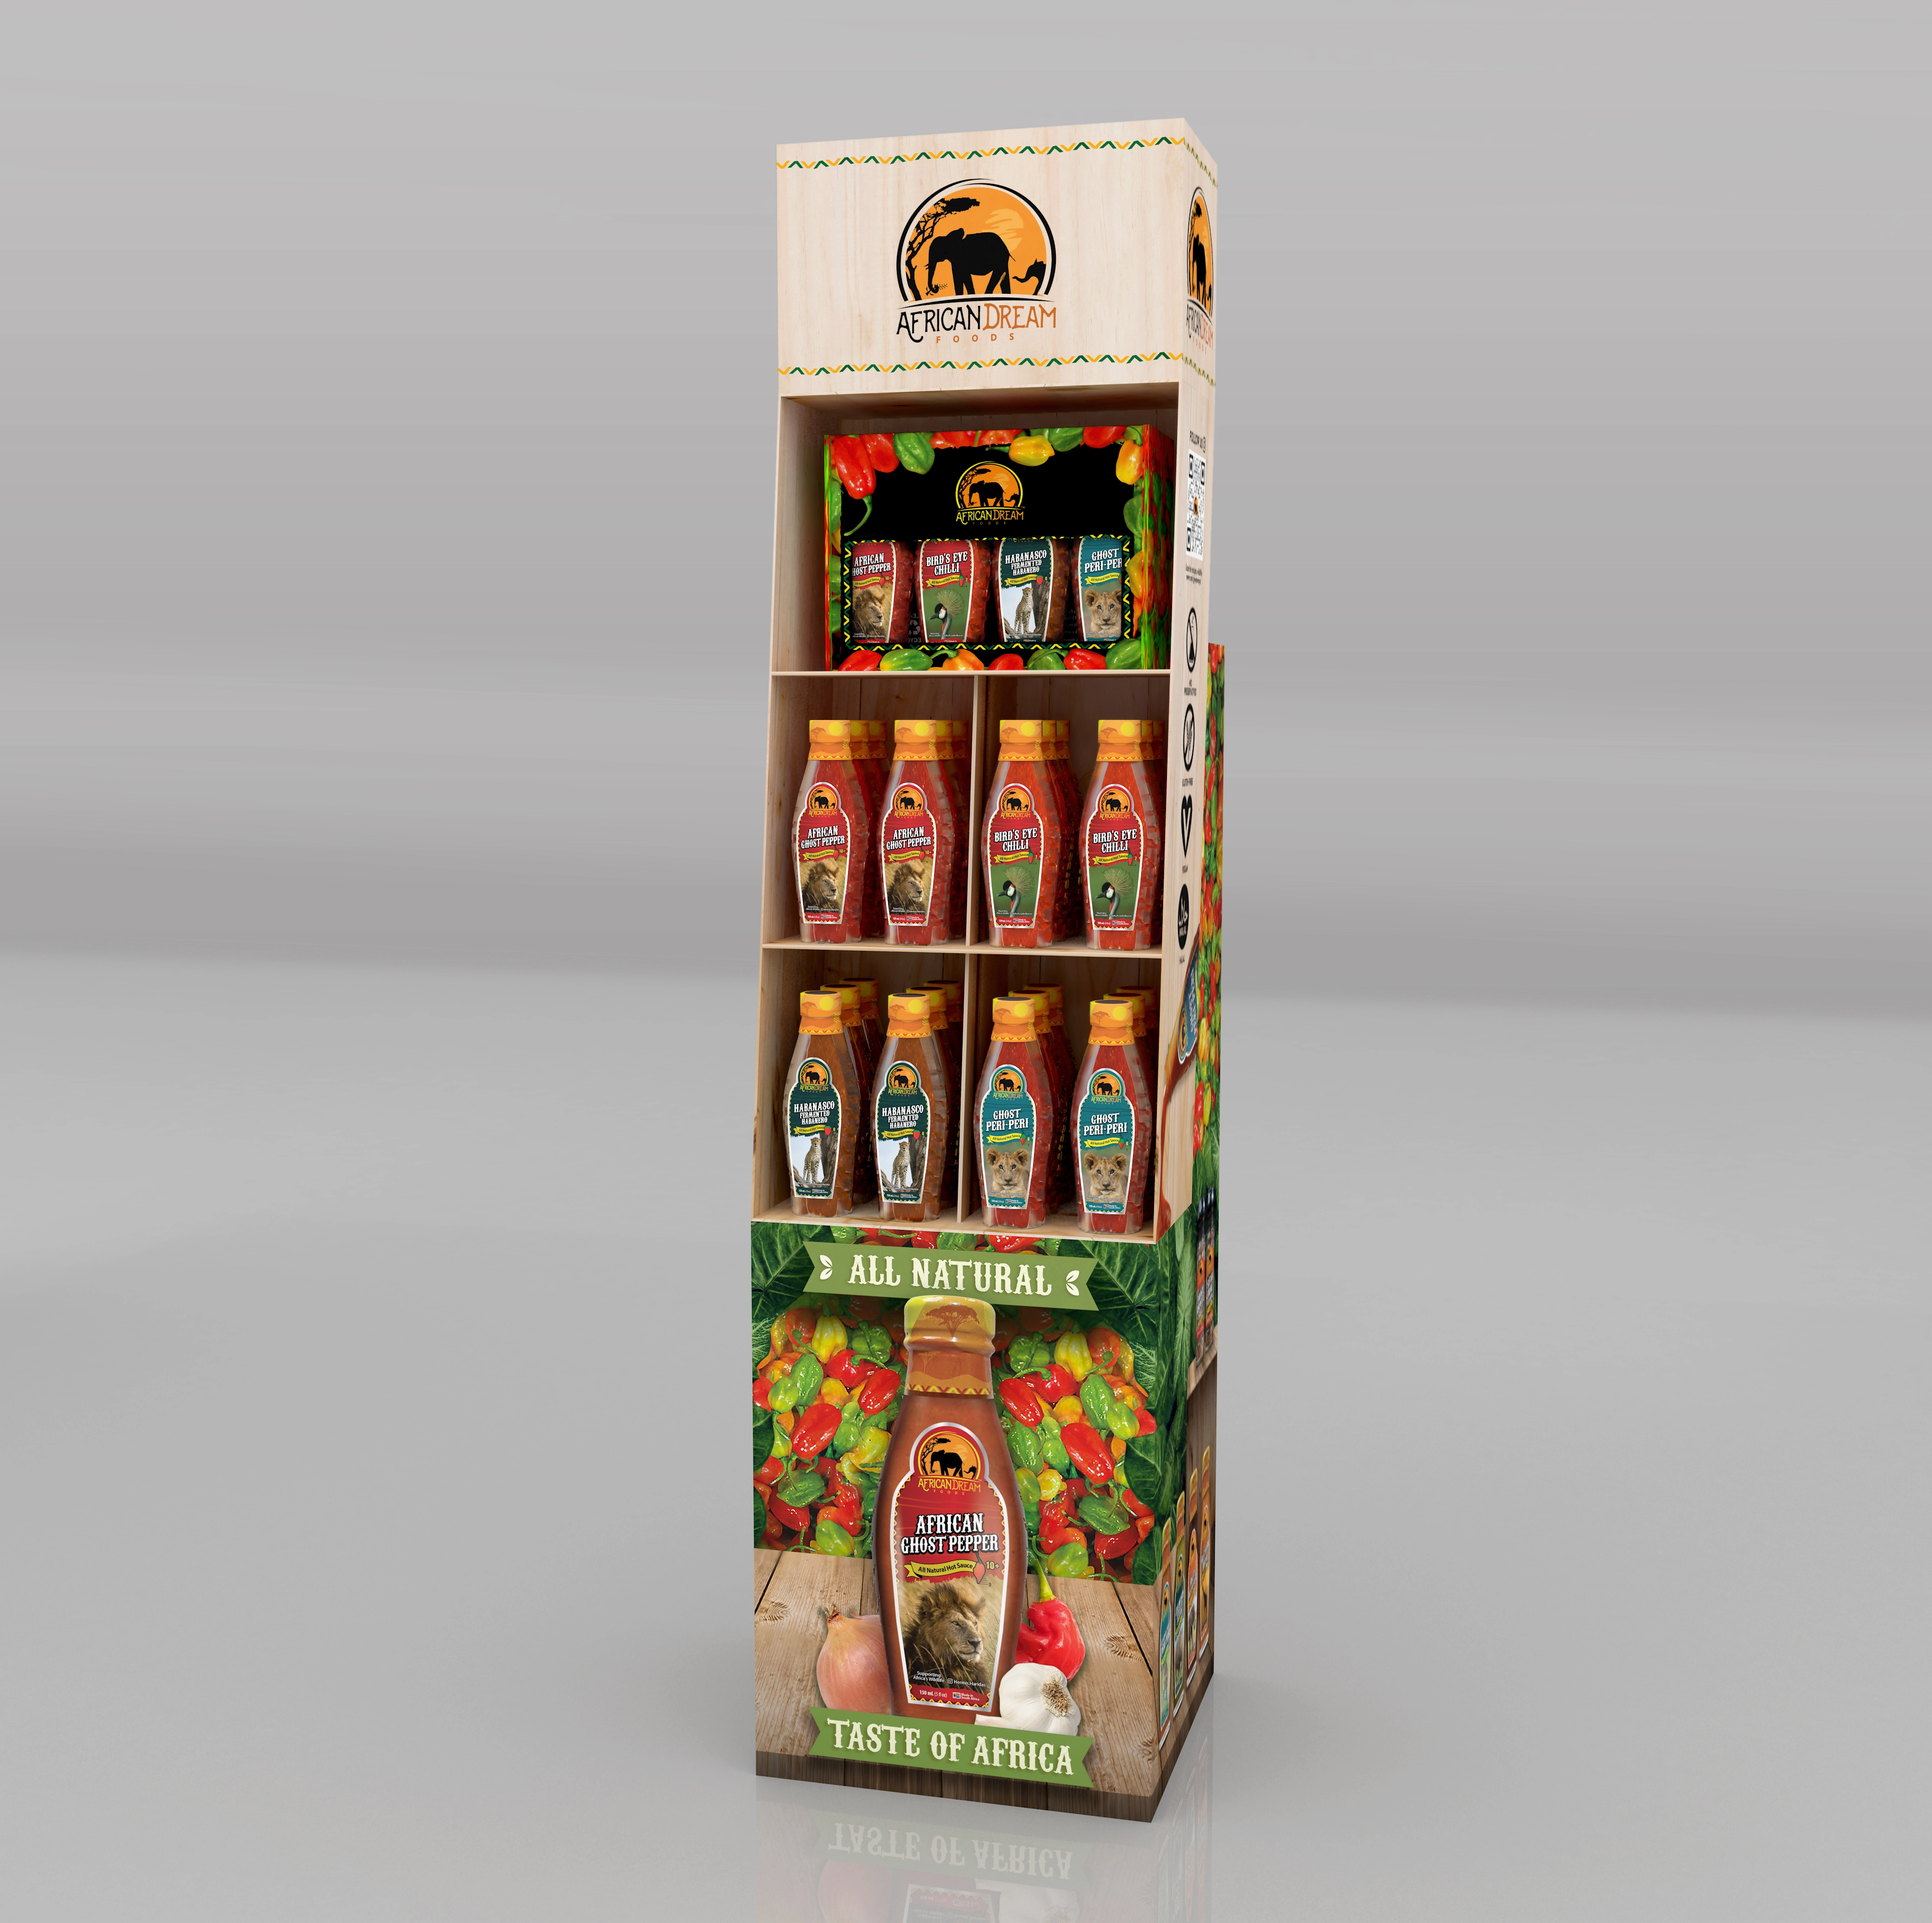 African Dream Foods DS-00 display shipper - slight angle